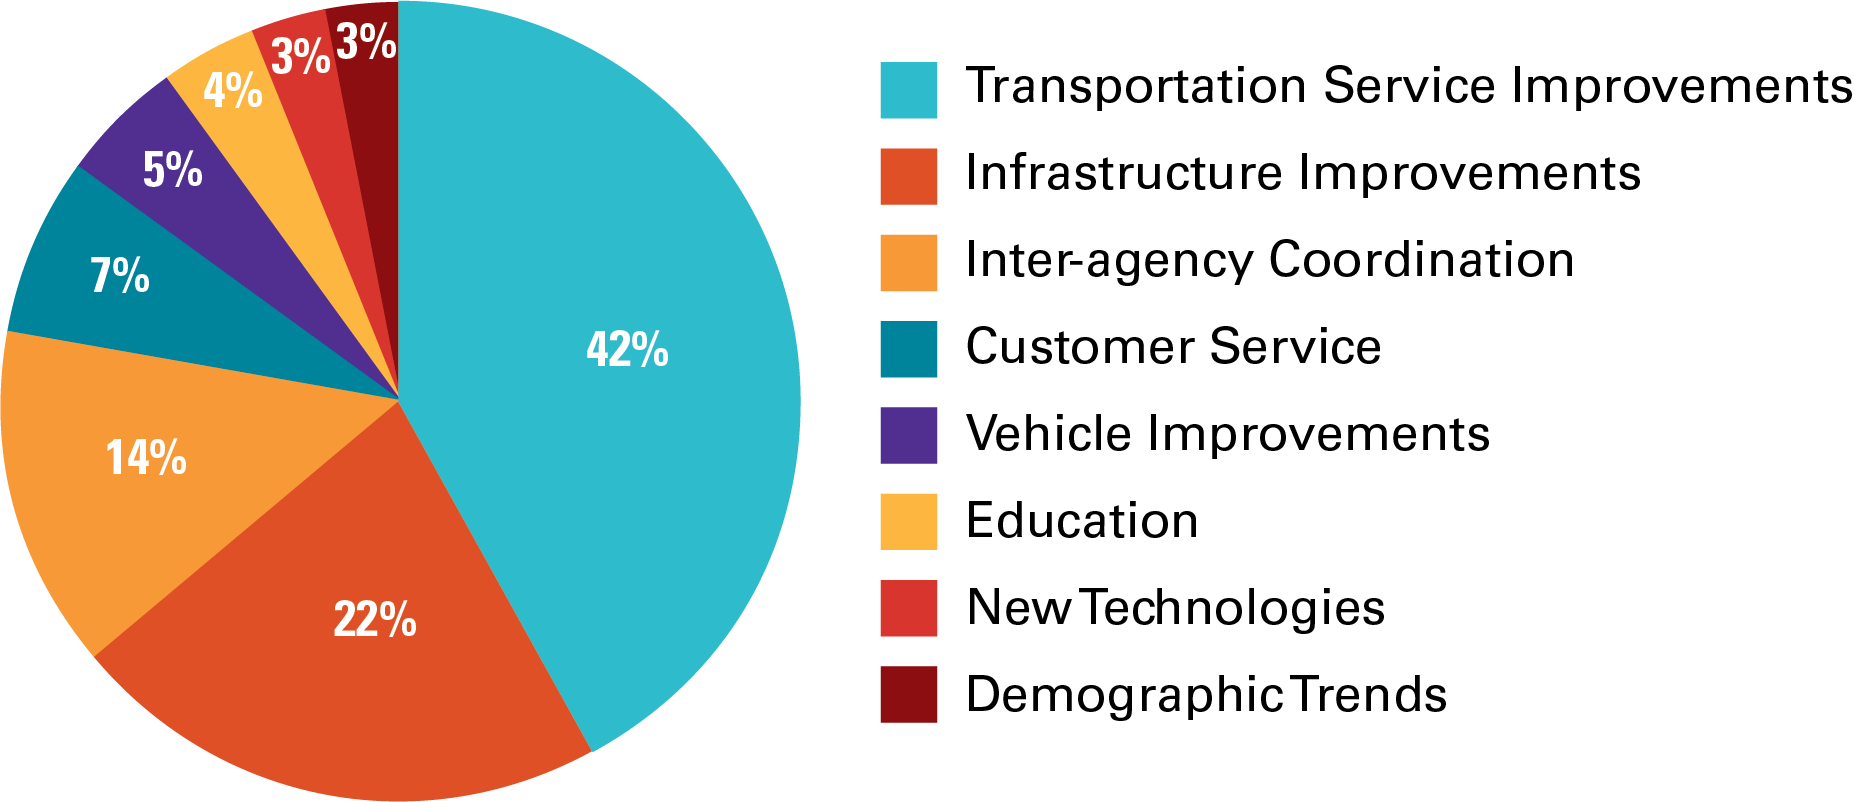 This chart shows the share of input gathered by public outreach that falls into each topic area. The topic areas include new technologies, customer service, demographic trends, education, infrastructure improvements, inter-agency coordination, transportation service improvements, and vehicle improvements.